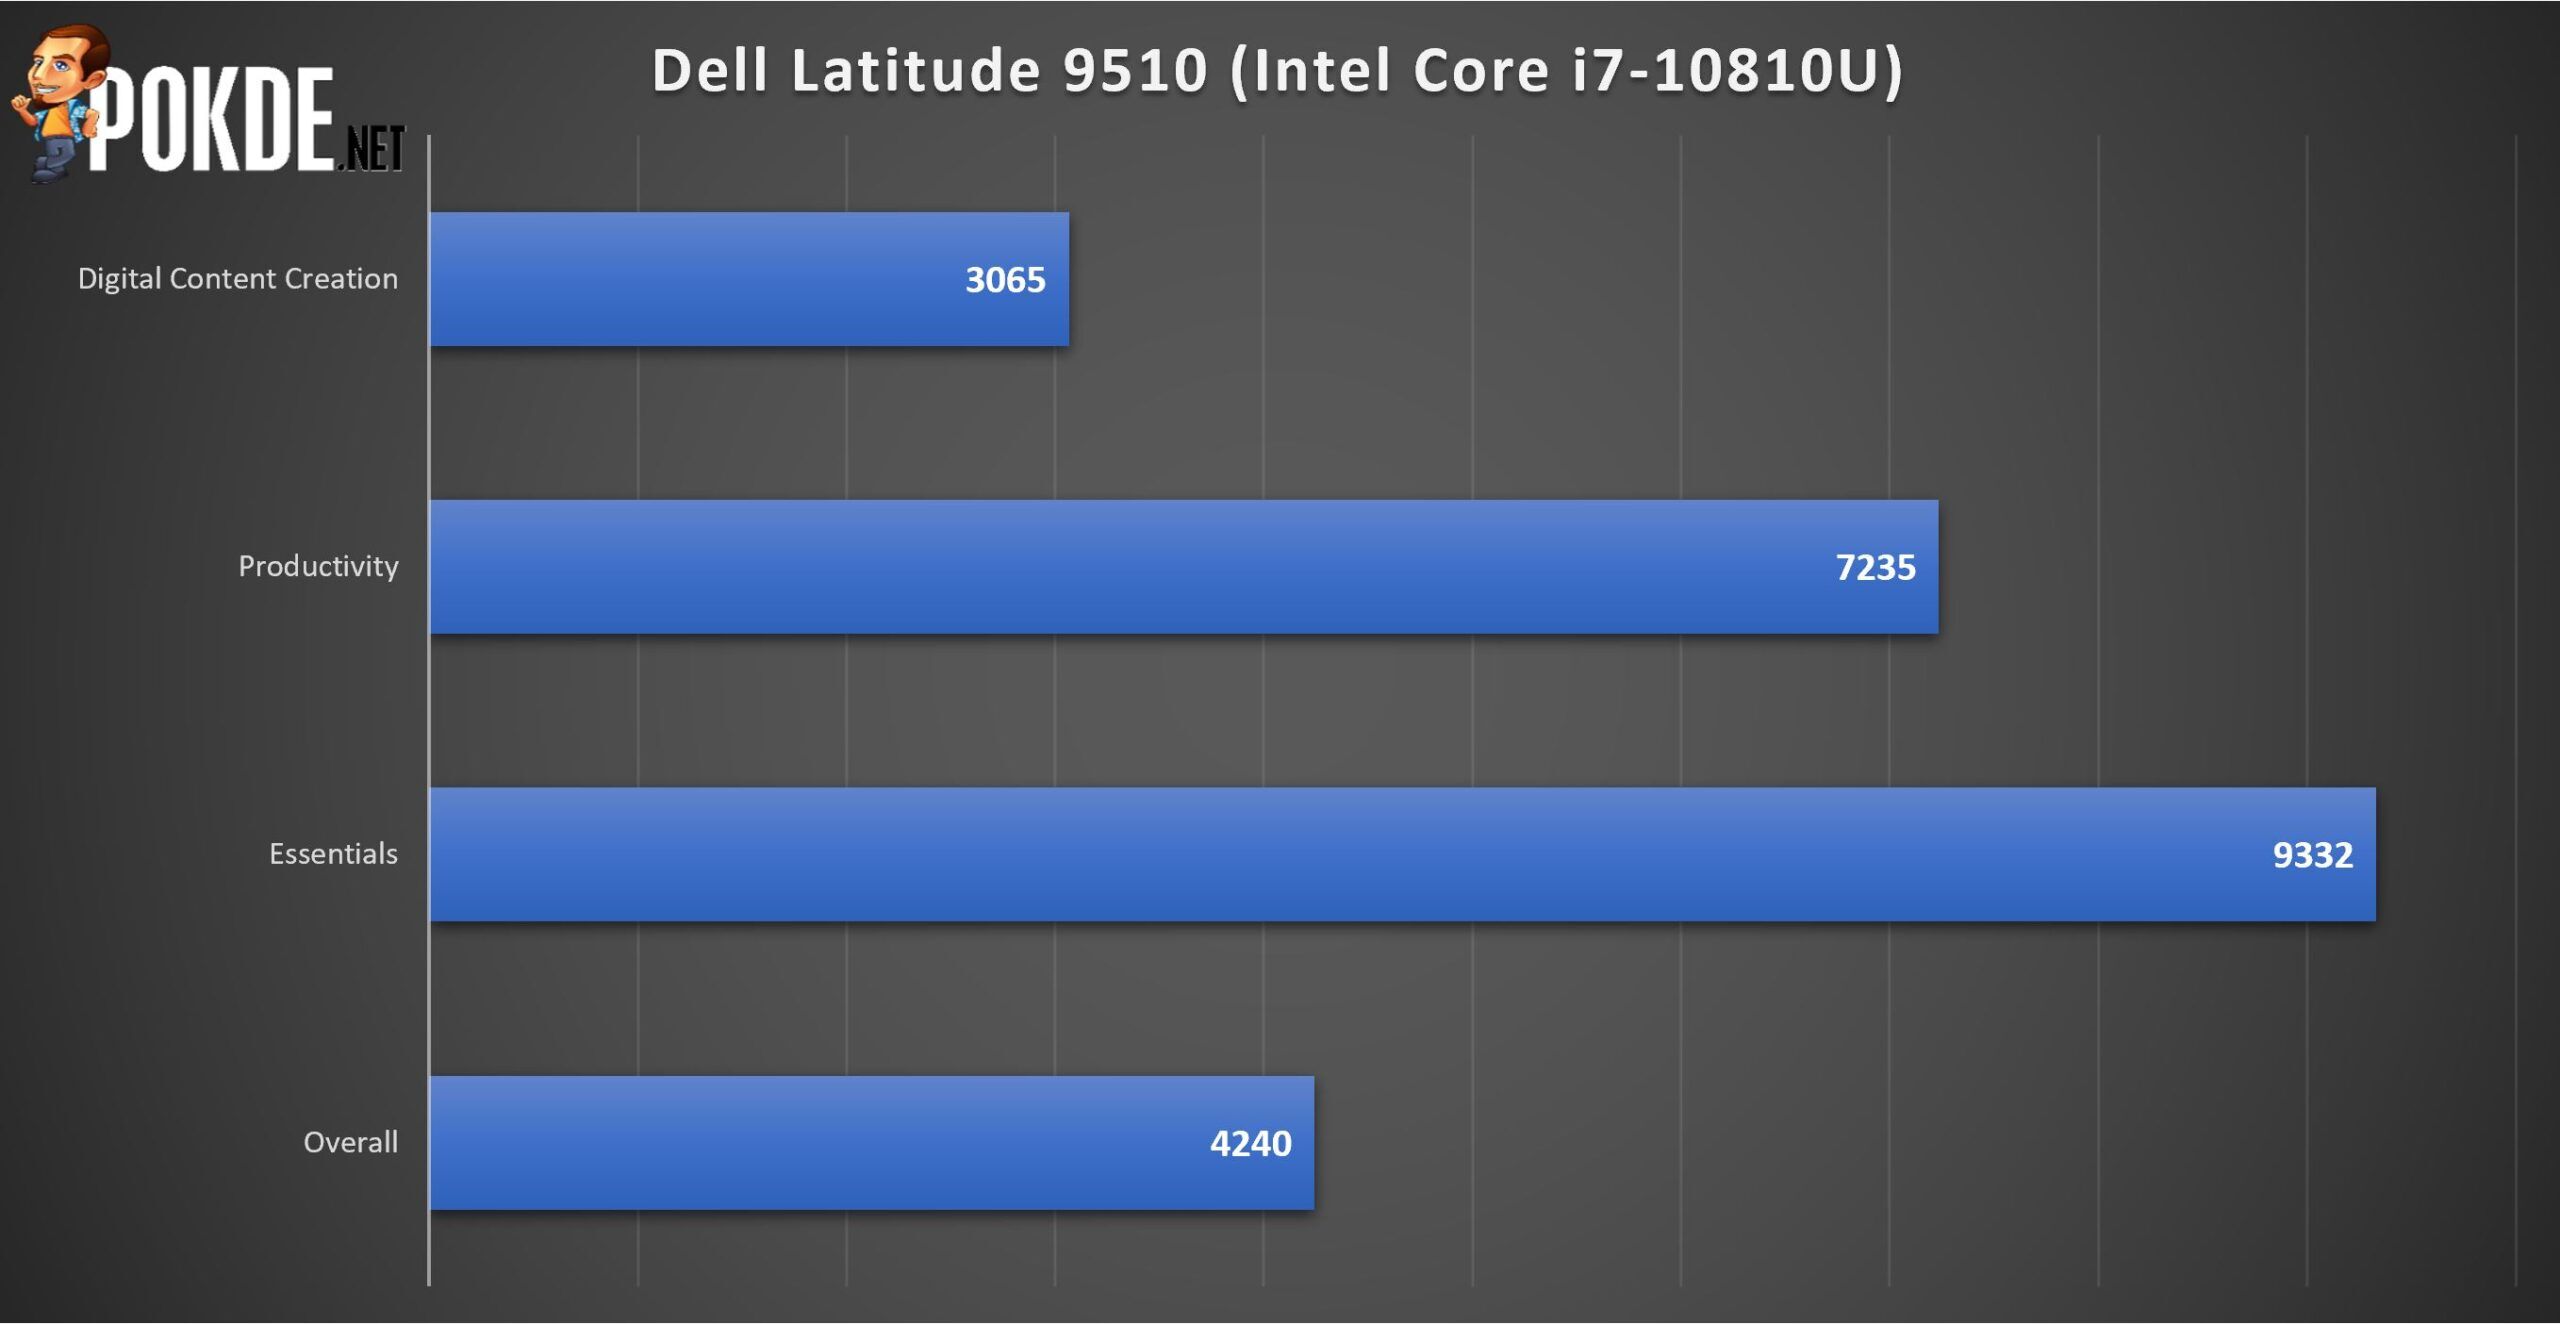 Dell Latitude 9510 2-in-1 Review - When Laptops Truly Mean Business 24